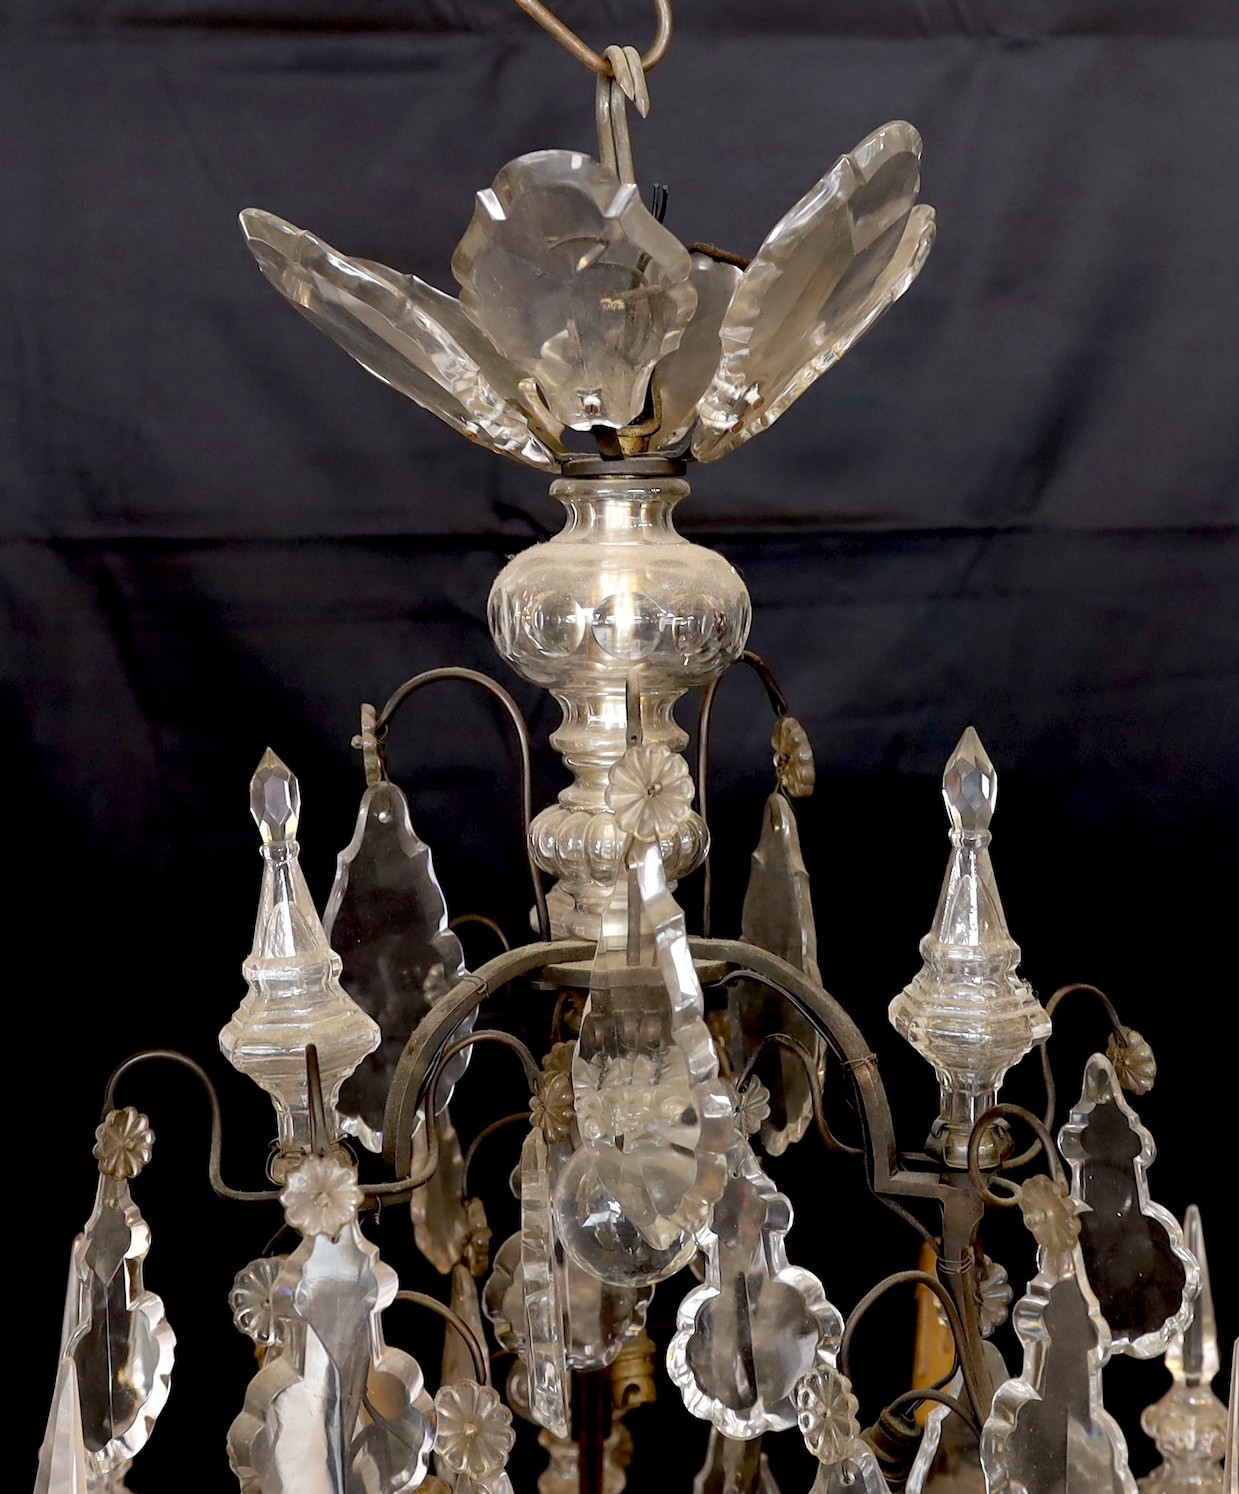 An early 20th century French bronze and cut glass six light chandelier, of particularly ornate design with spear finials, lozenge shaped drops and flower head motifs, height 101cm. width 60cm